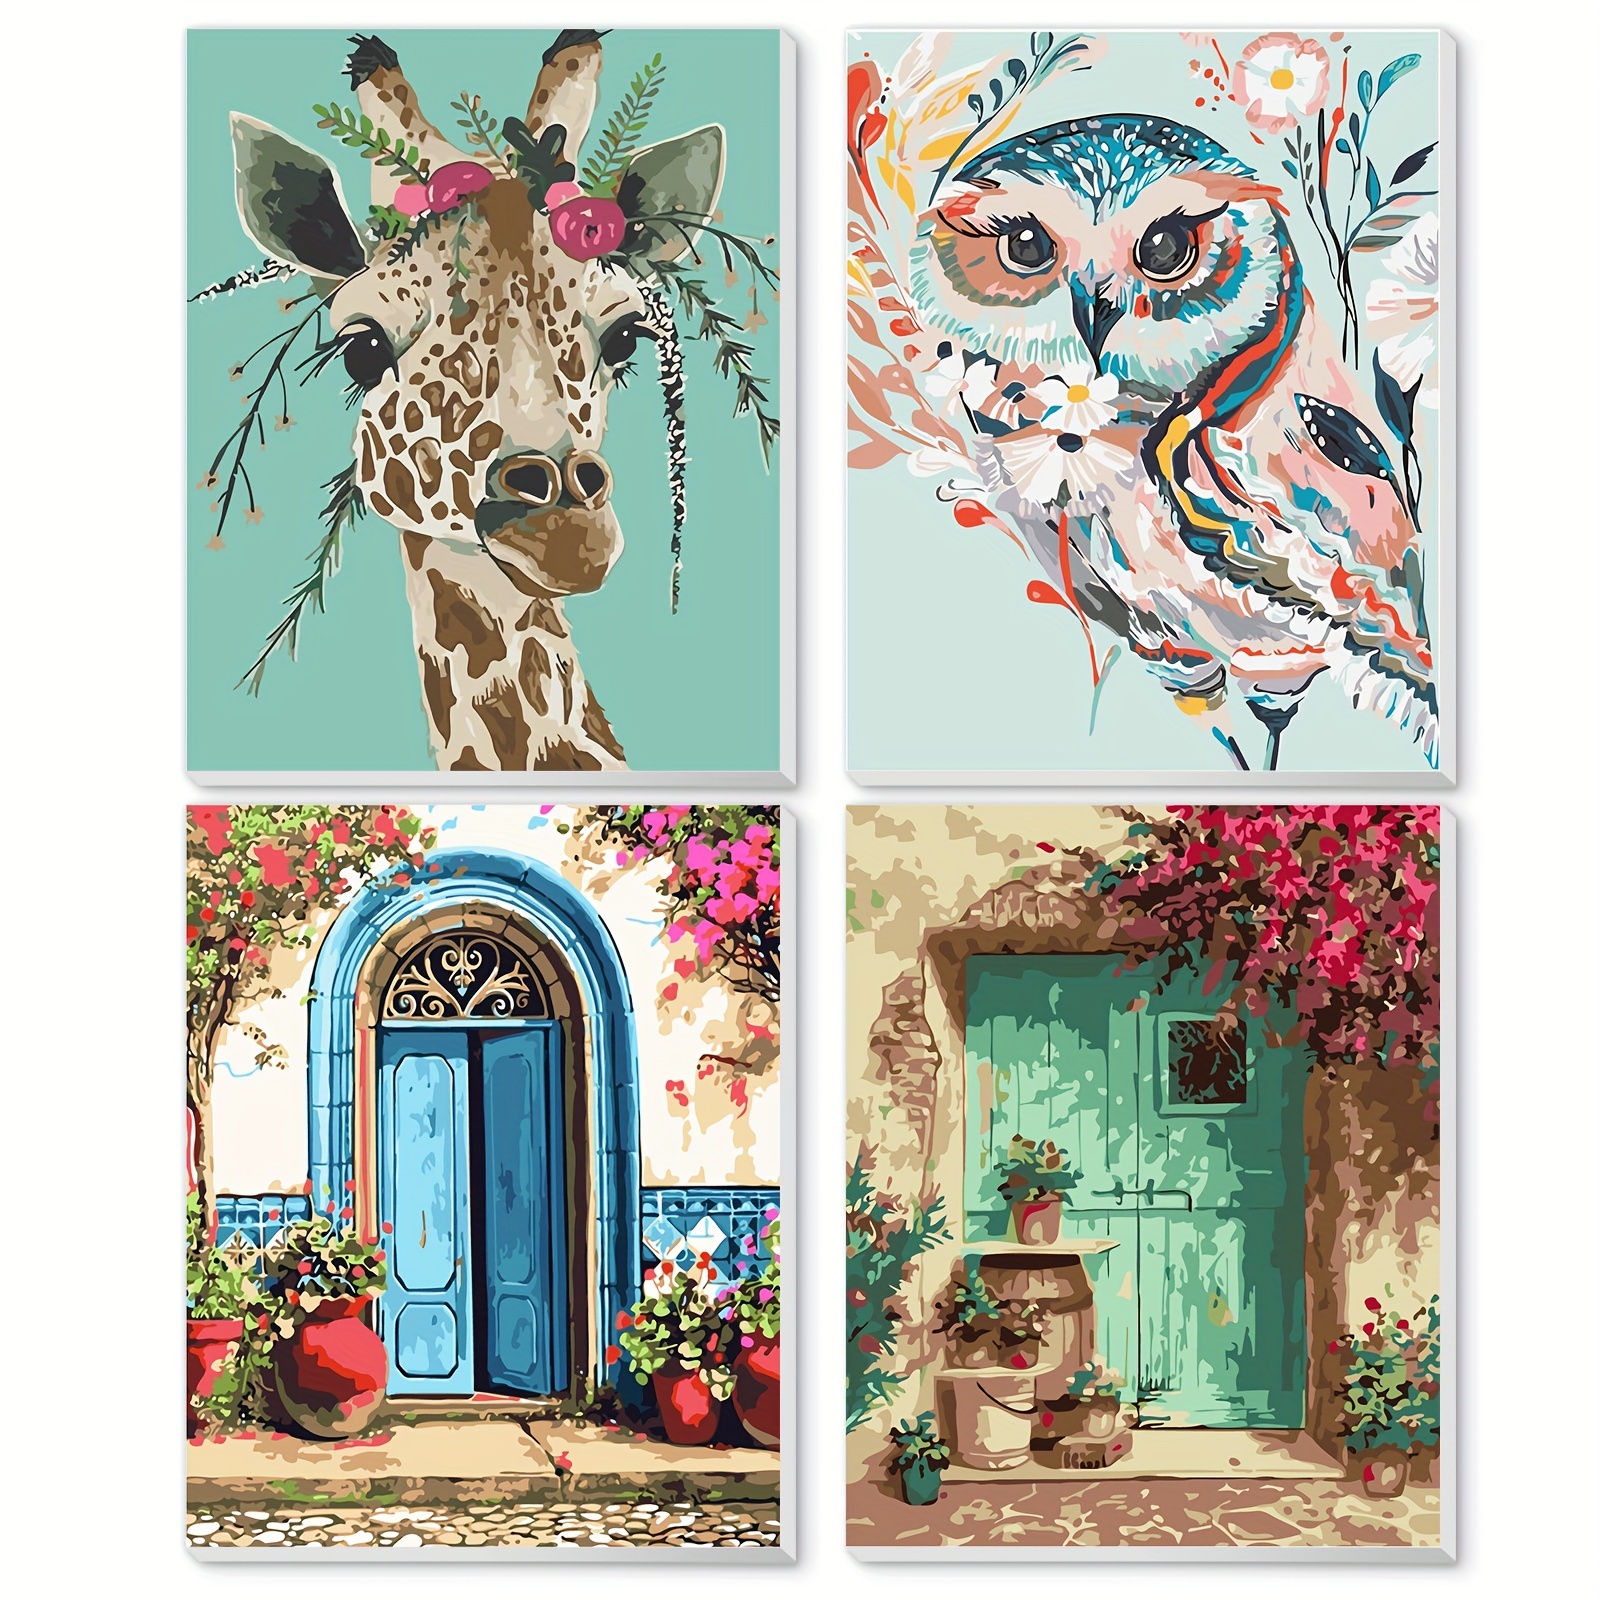 

4 Pack Paint By Number For Adults Beginner With Framed Canvas, Paint By Numbers Kit 9x12 Inch For Gift Home Décoration With Paint Brushes, Acrylic Paint Set, Animal And Garden Design